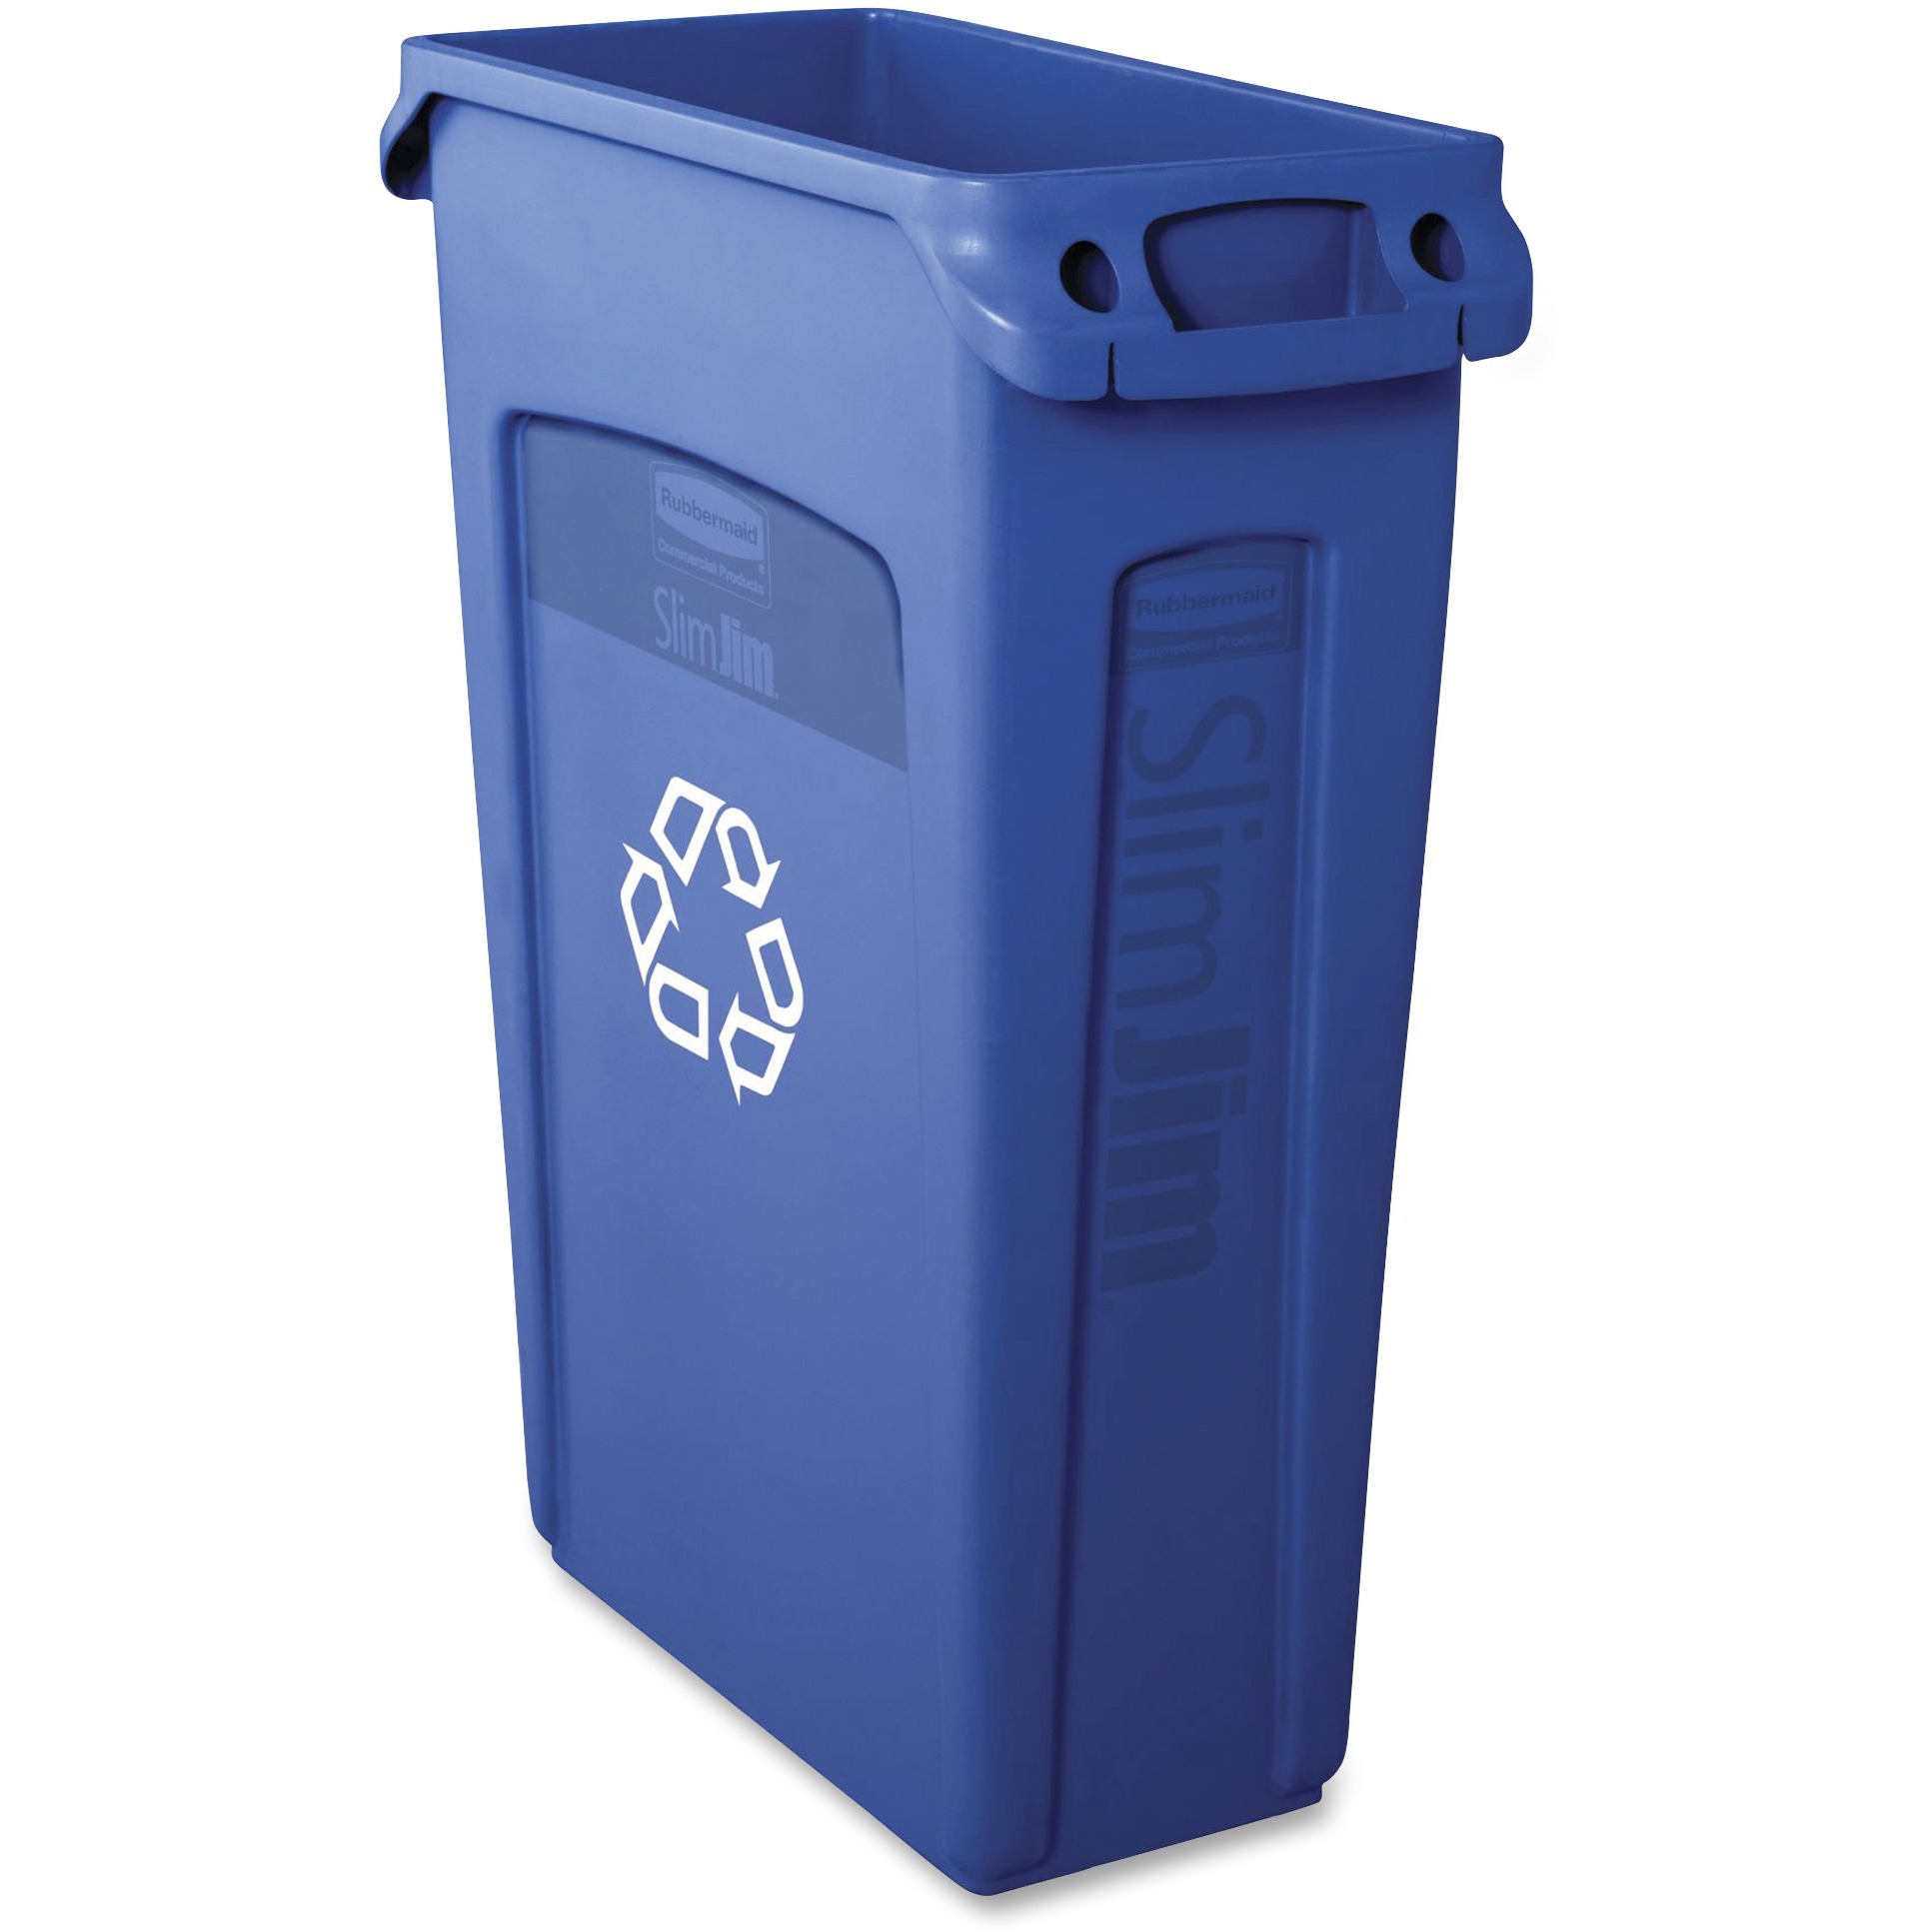 Rubbermaid Commercial Products FG354007BLUE Venting Slim Jim Recycling Waste Container, Blue - image 1 of 4